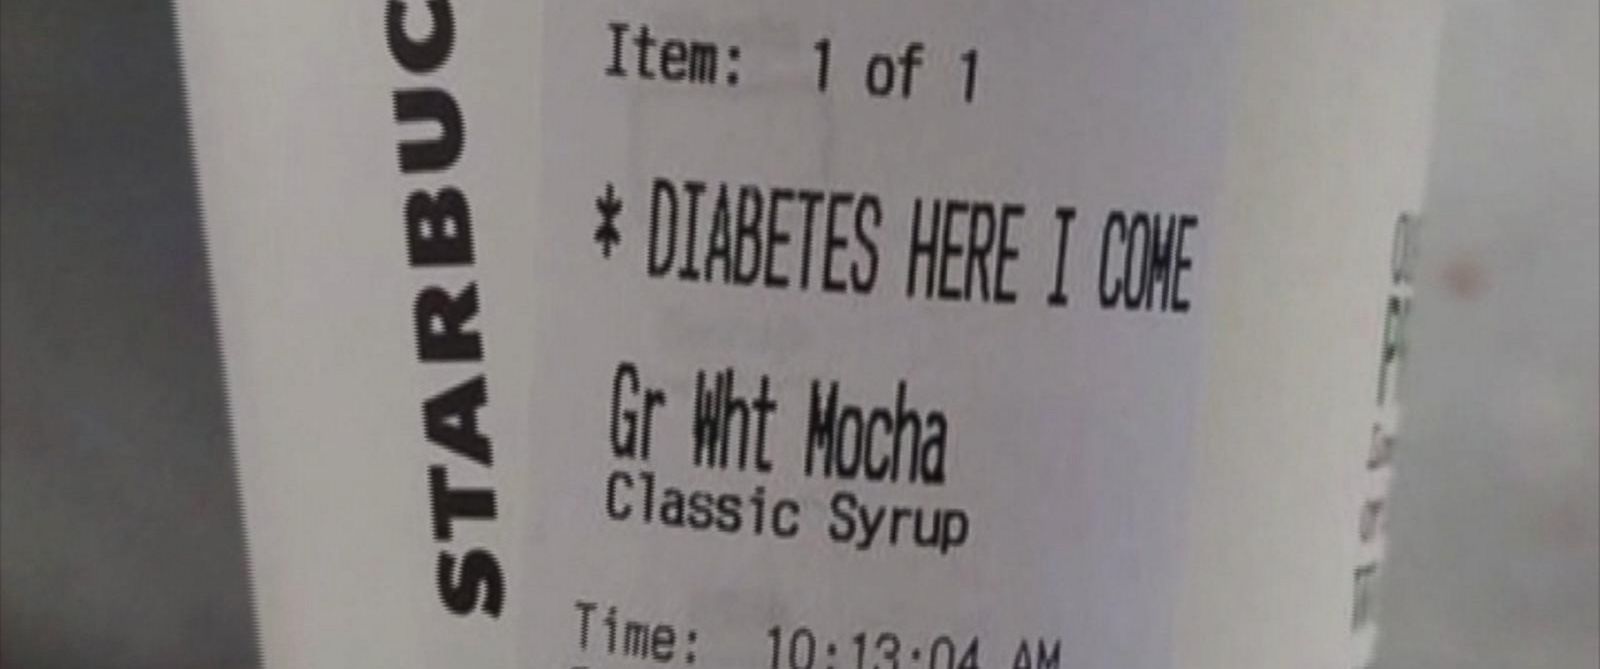 Starbucks Serves Man Beverage With Label ‘Diabetes Here I Come’